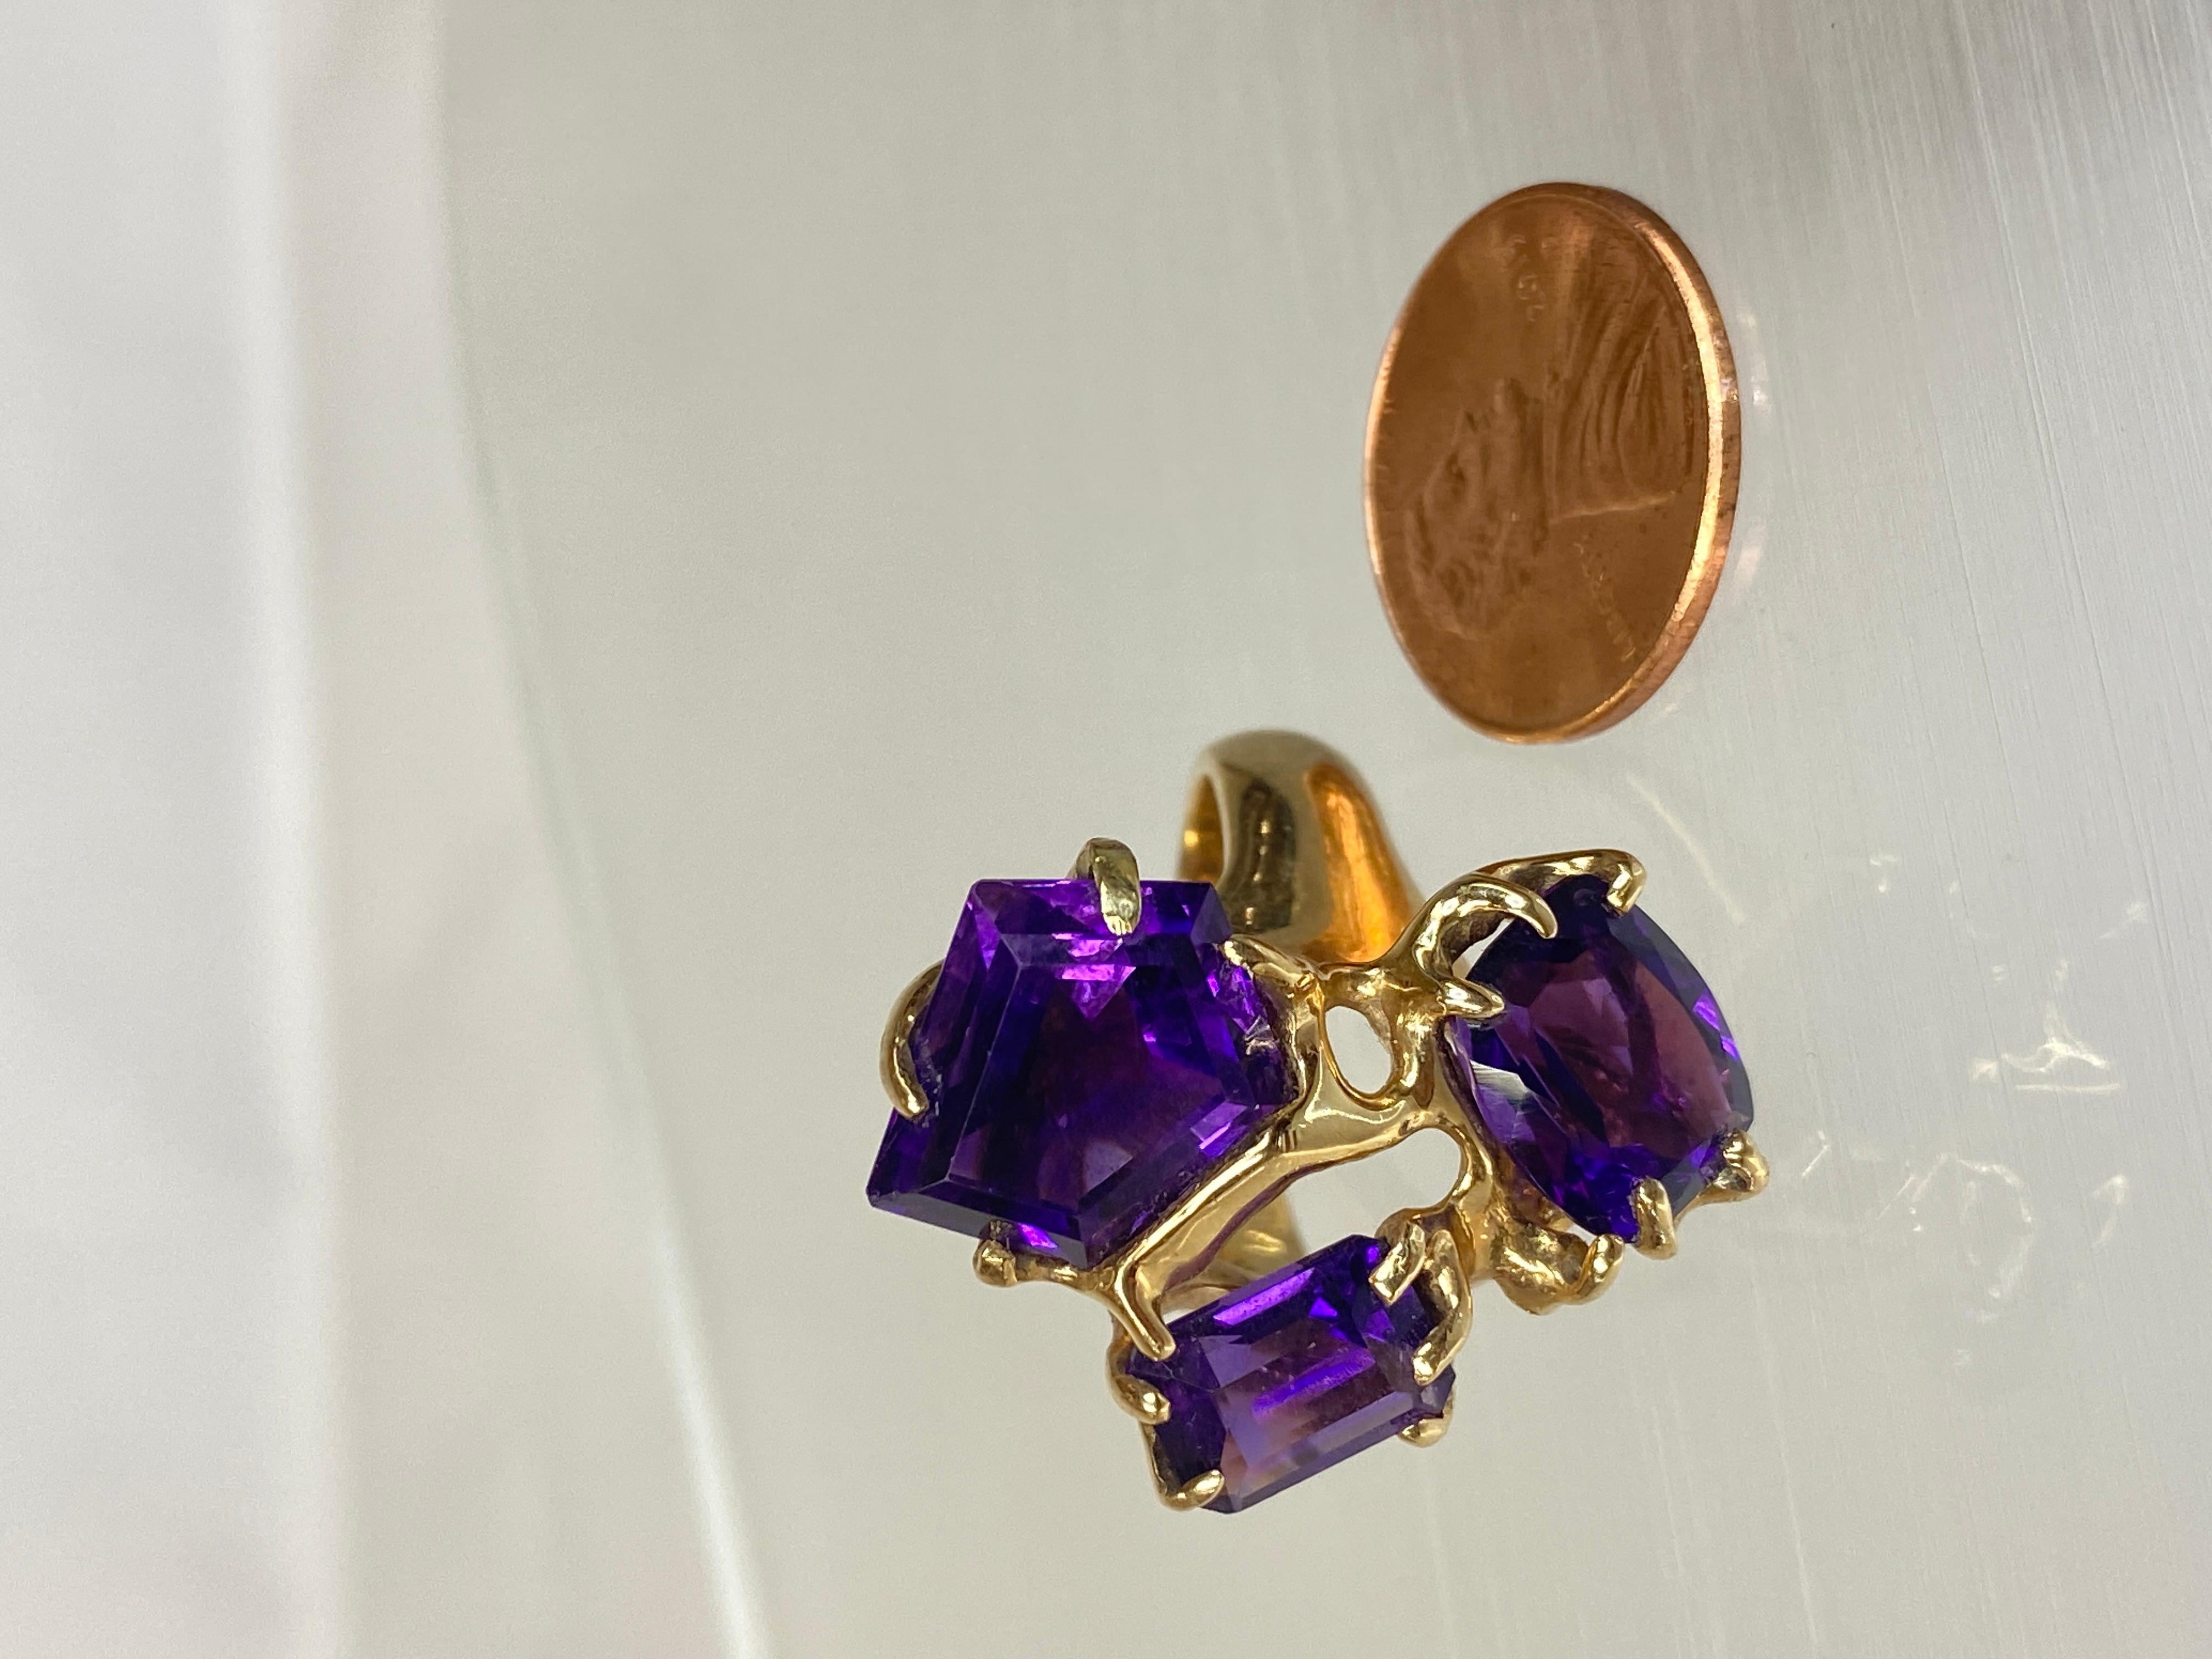 An ultra-modern 14K yellow gold cocktail ring with three large asymmetrical amethyst gemstones is a striking statement piece that epitomizes contemporary elegance and bold design. Crafted with sleek lines and avant-garde flair, this ring captures